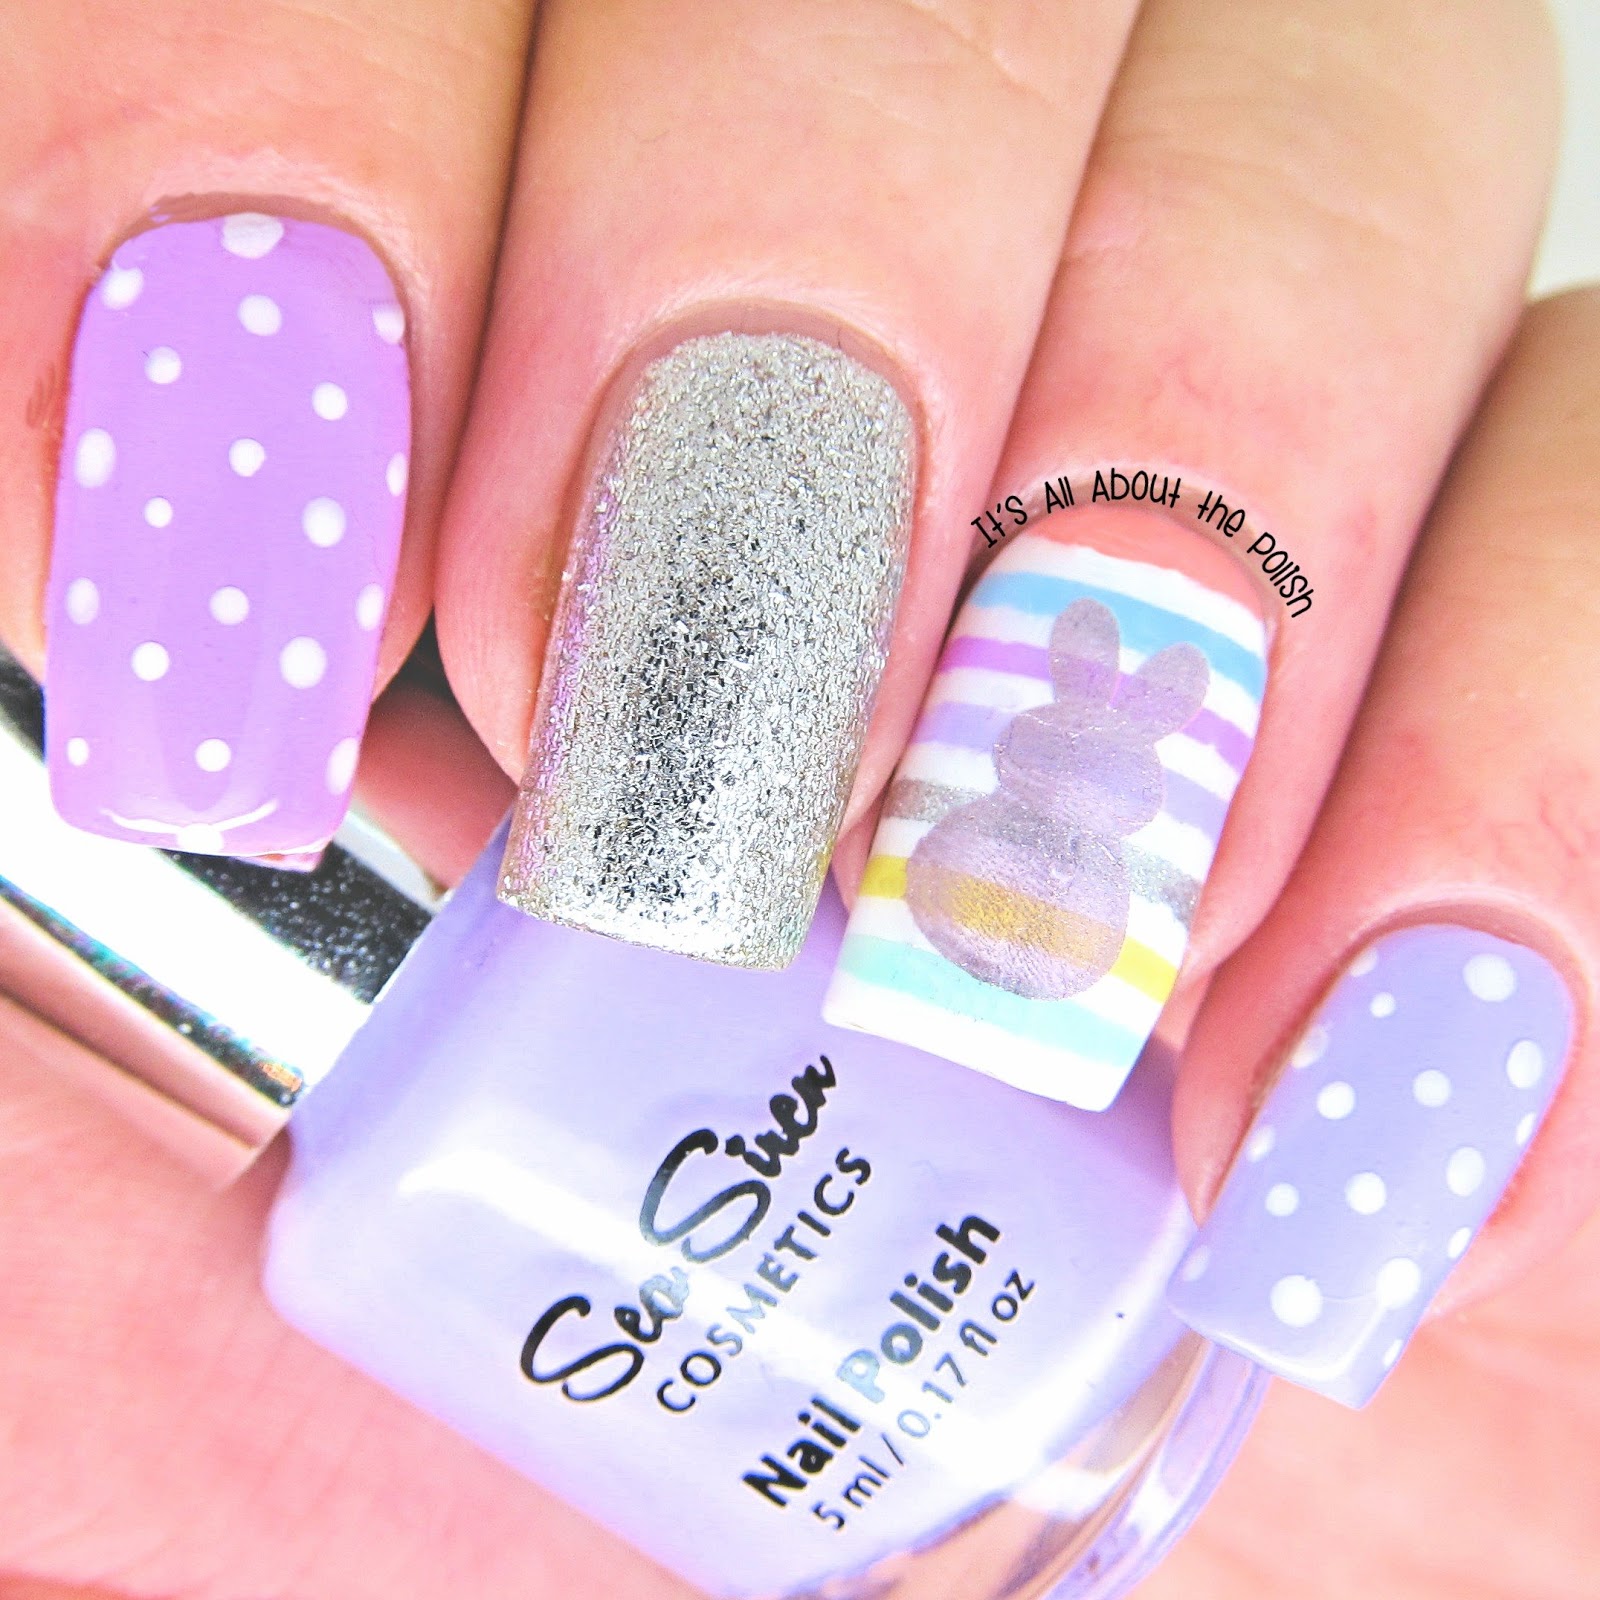 It's all about the polish: Easter Nail design - pastel stripes and bunny